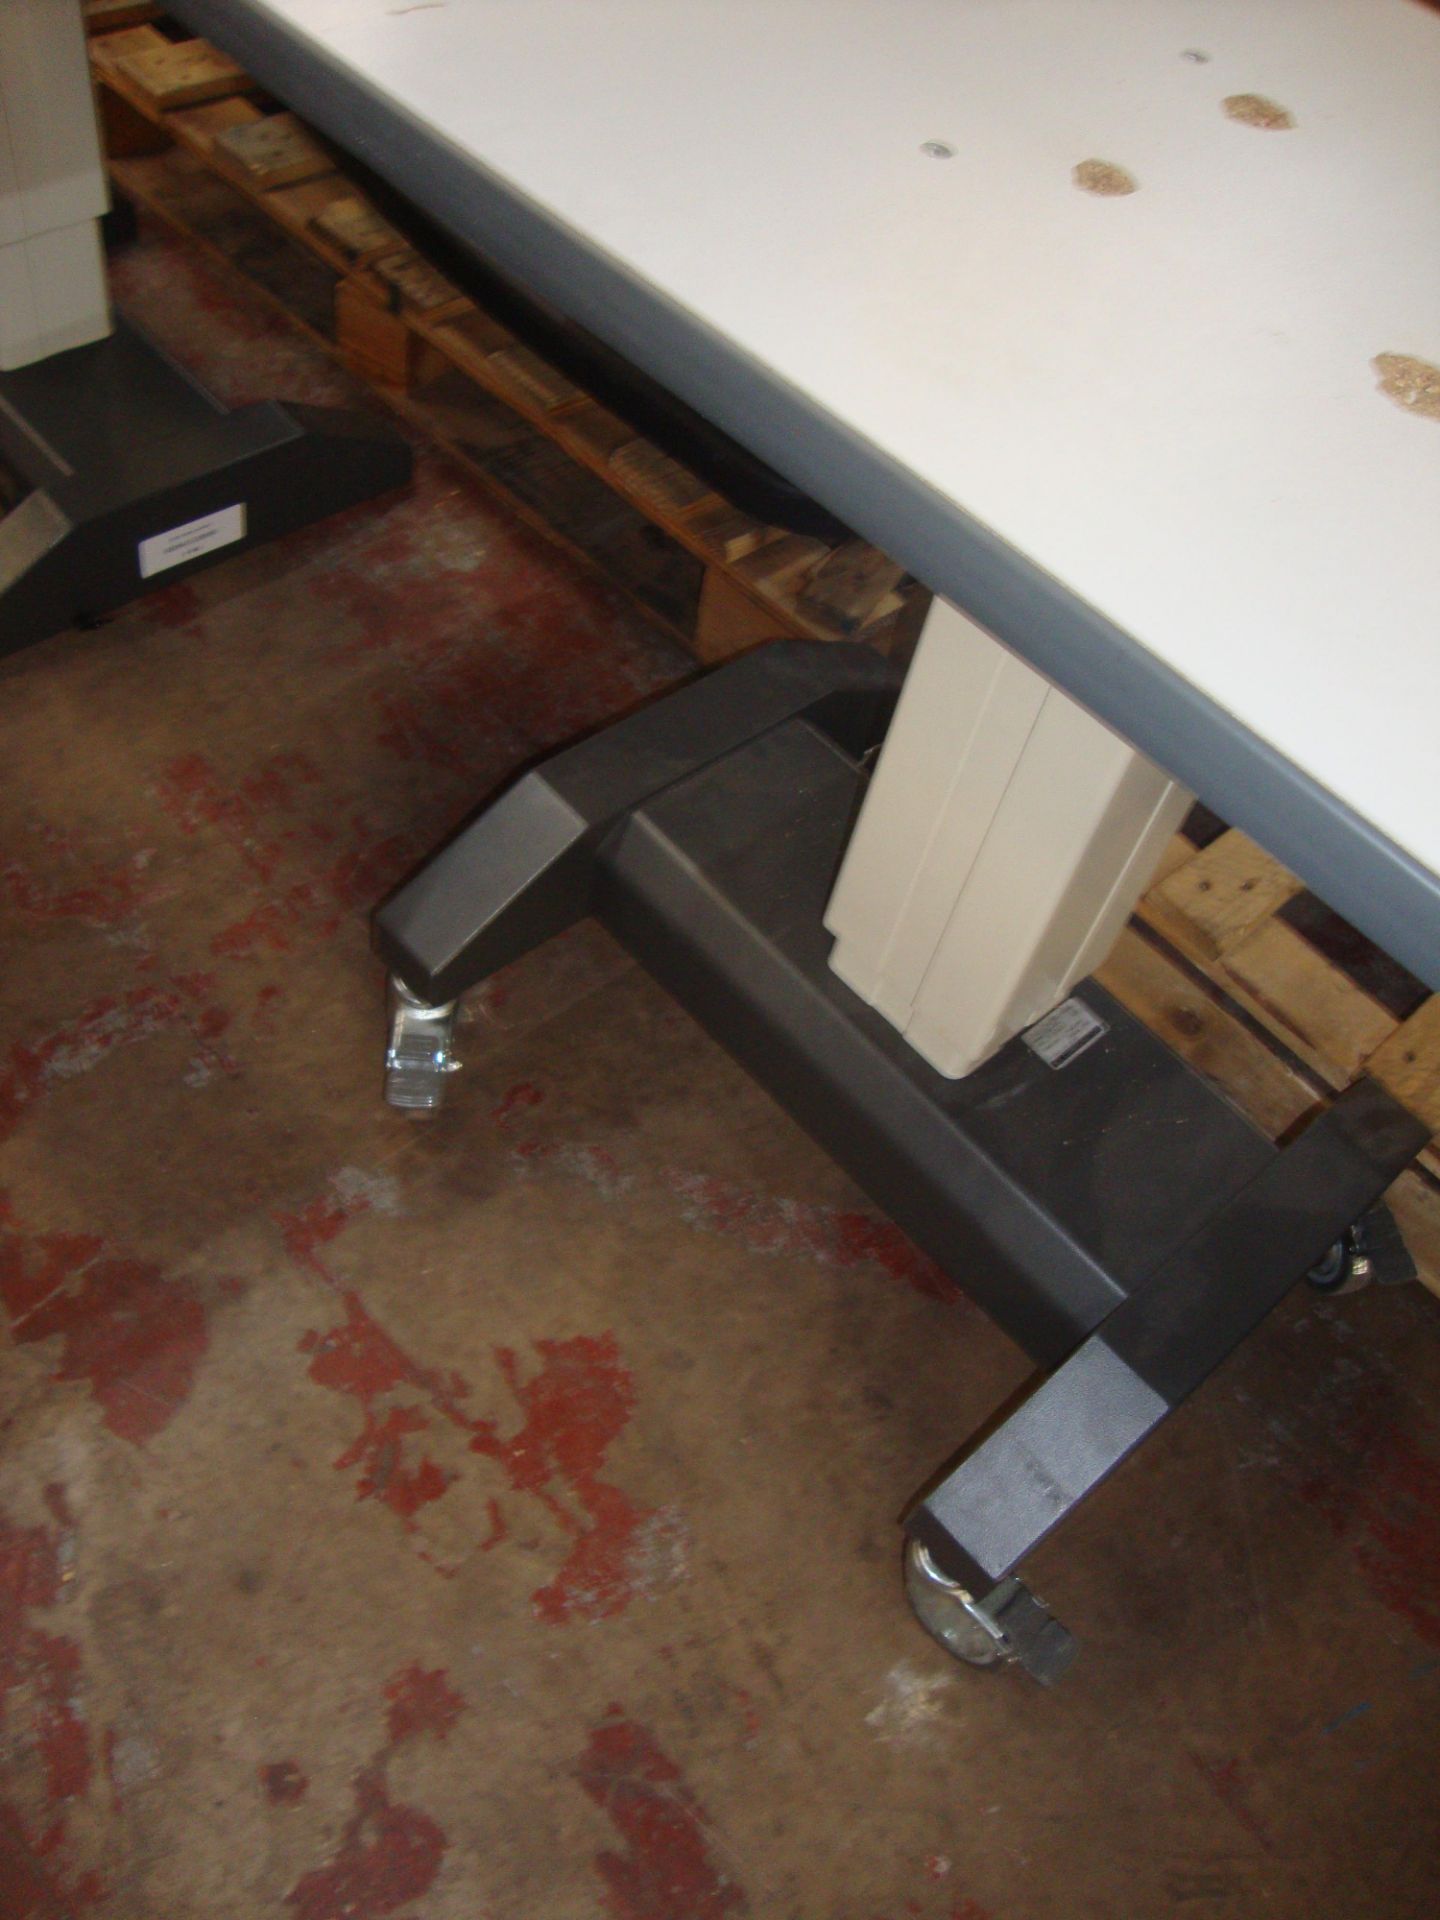 Electric motorized rising table 910mm x 490mm. NB. tabletop has pulled away from the screws that - Image 2 of 2